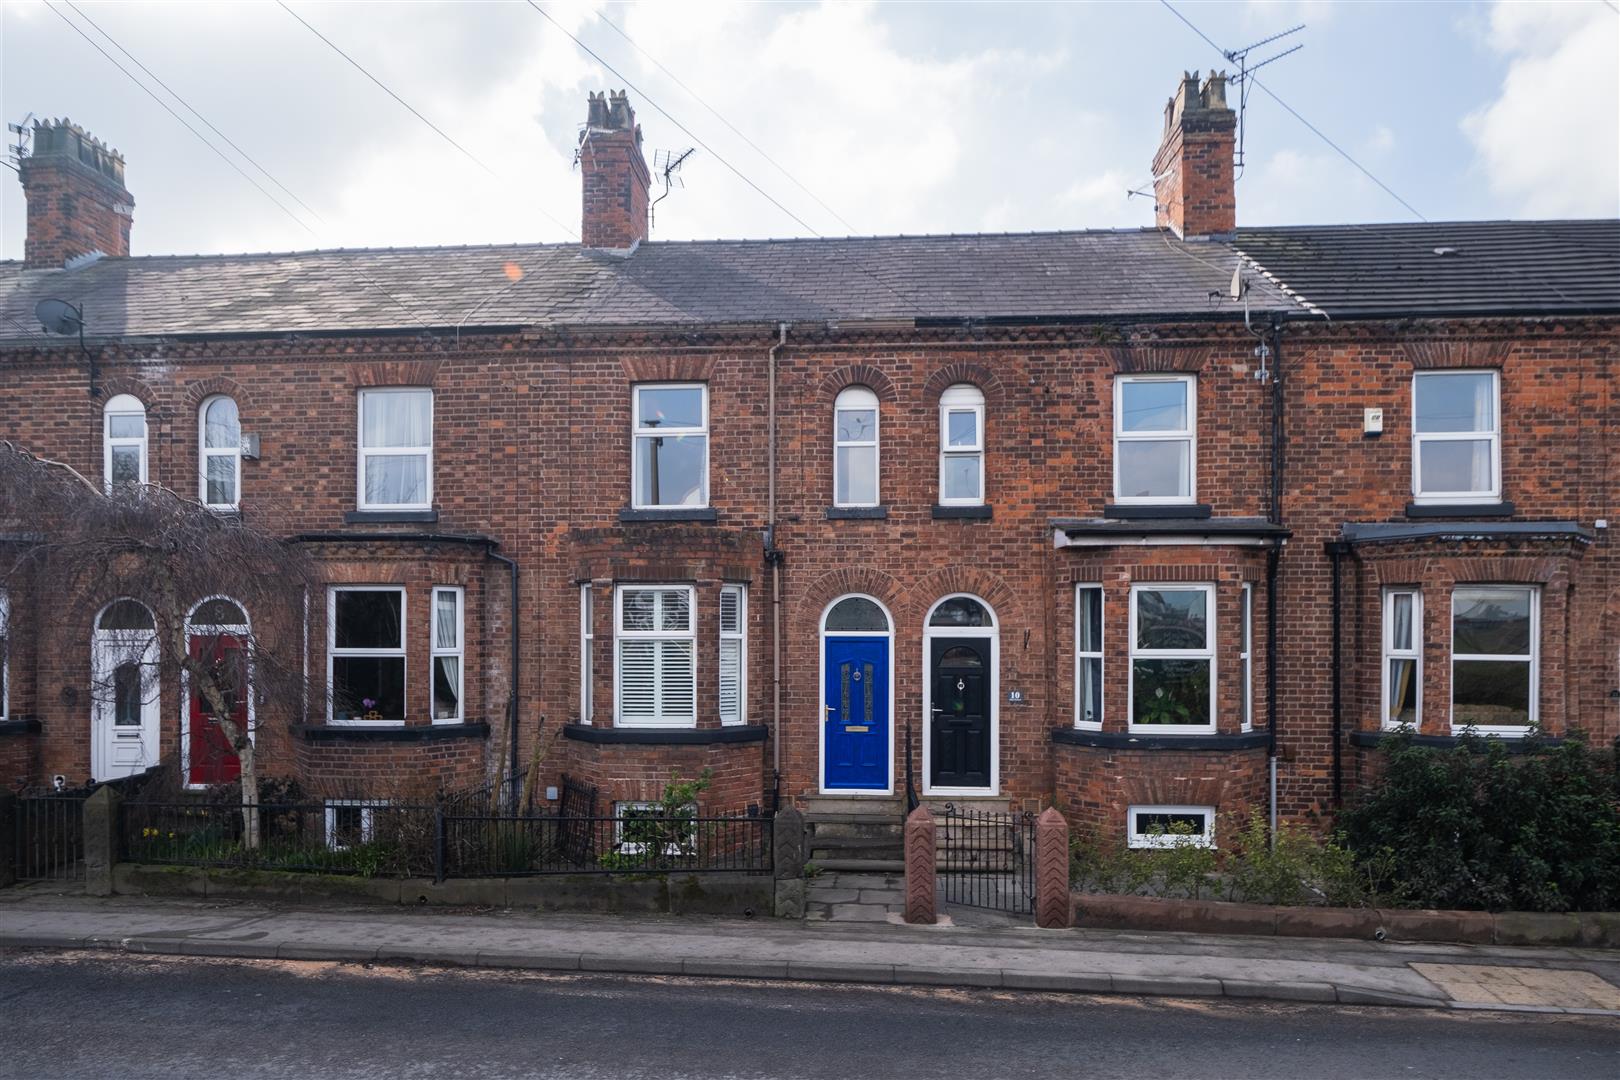 6 bedroom  Terraced House for Sale in Northwich